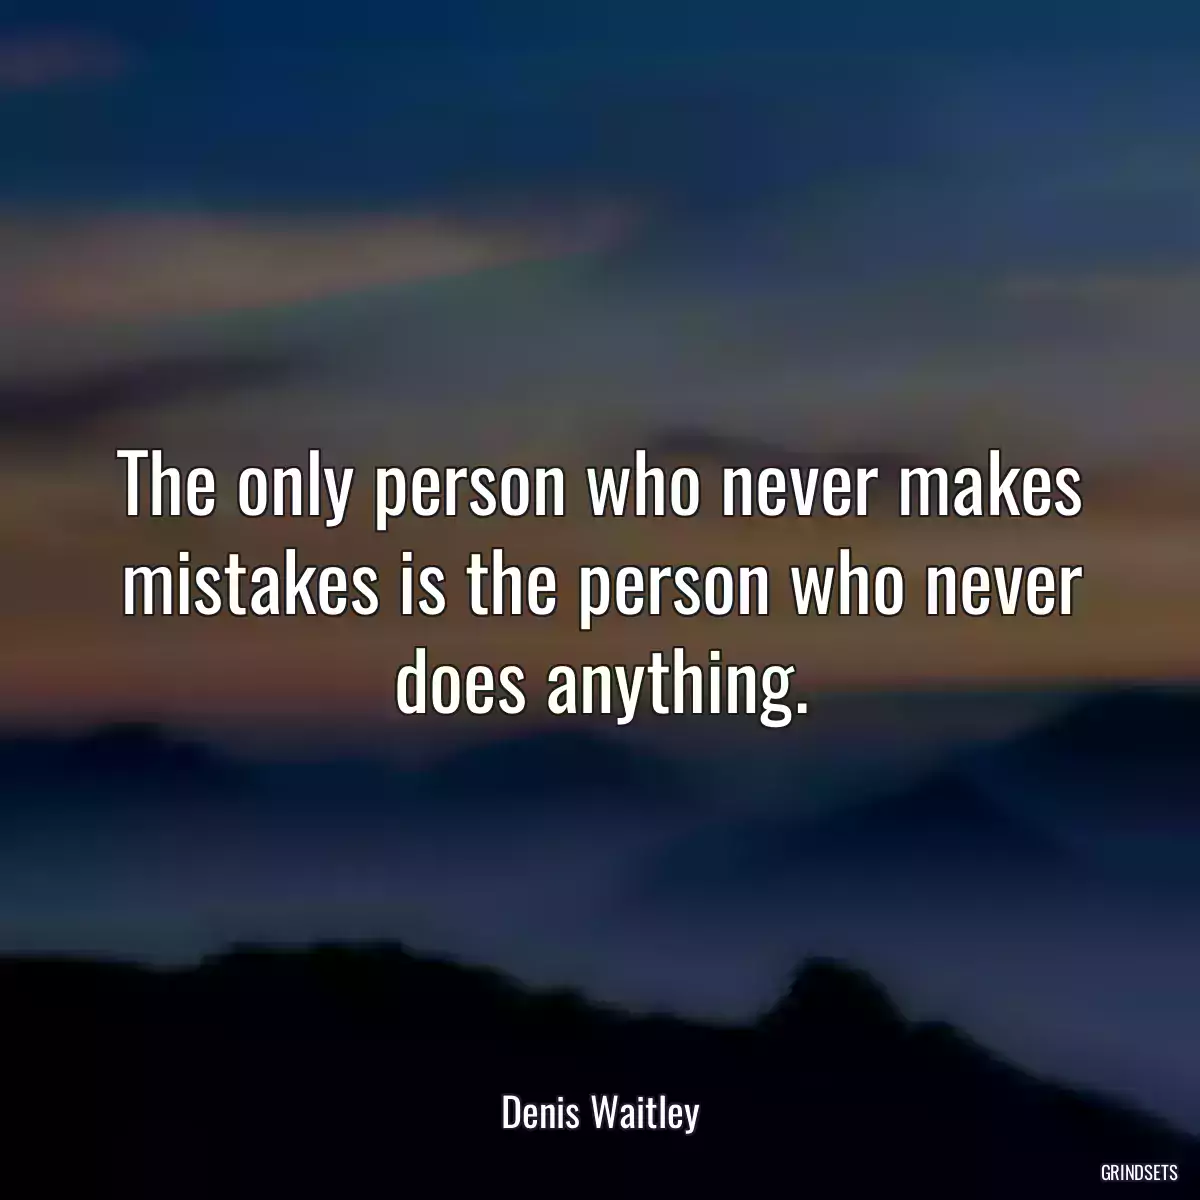 The only person who never makes mistakes is the person who never does anything.